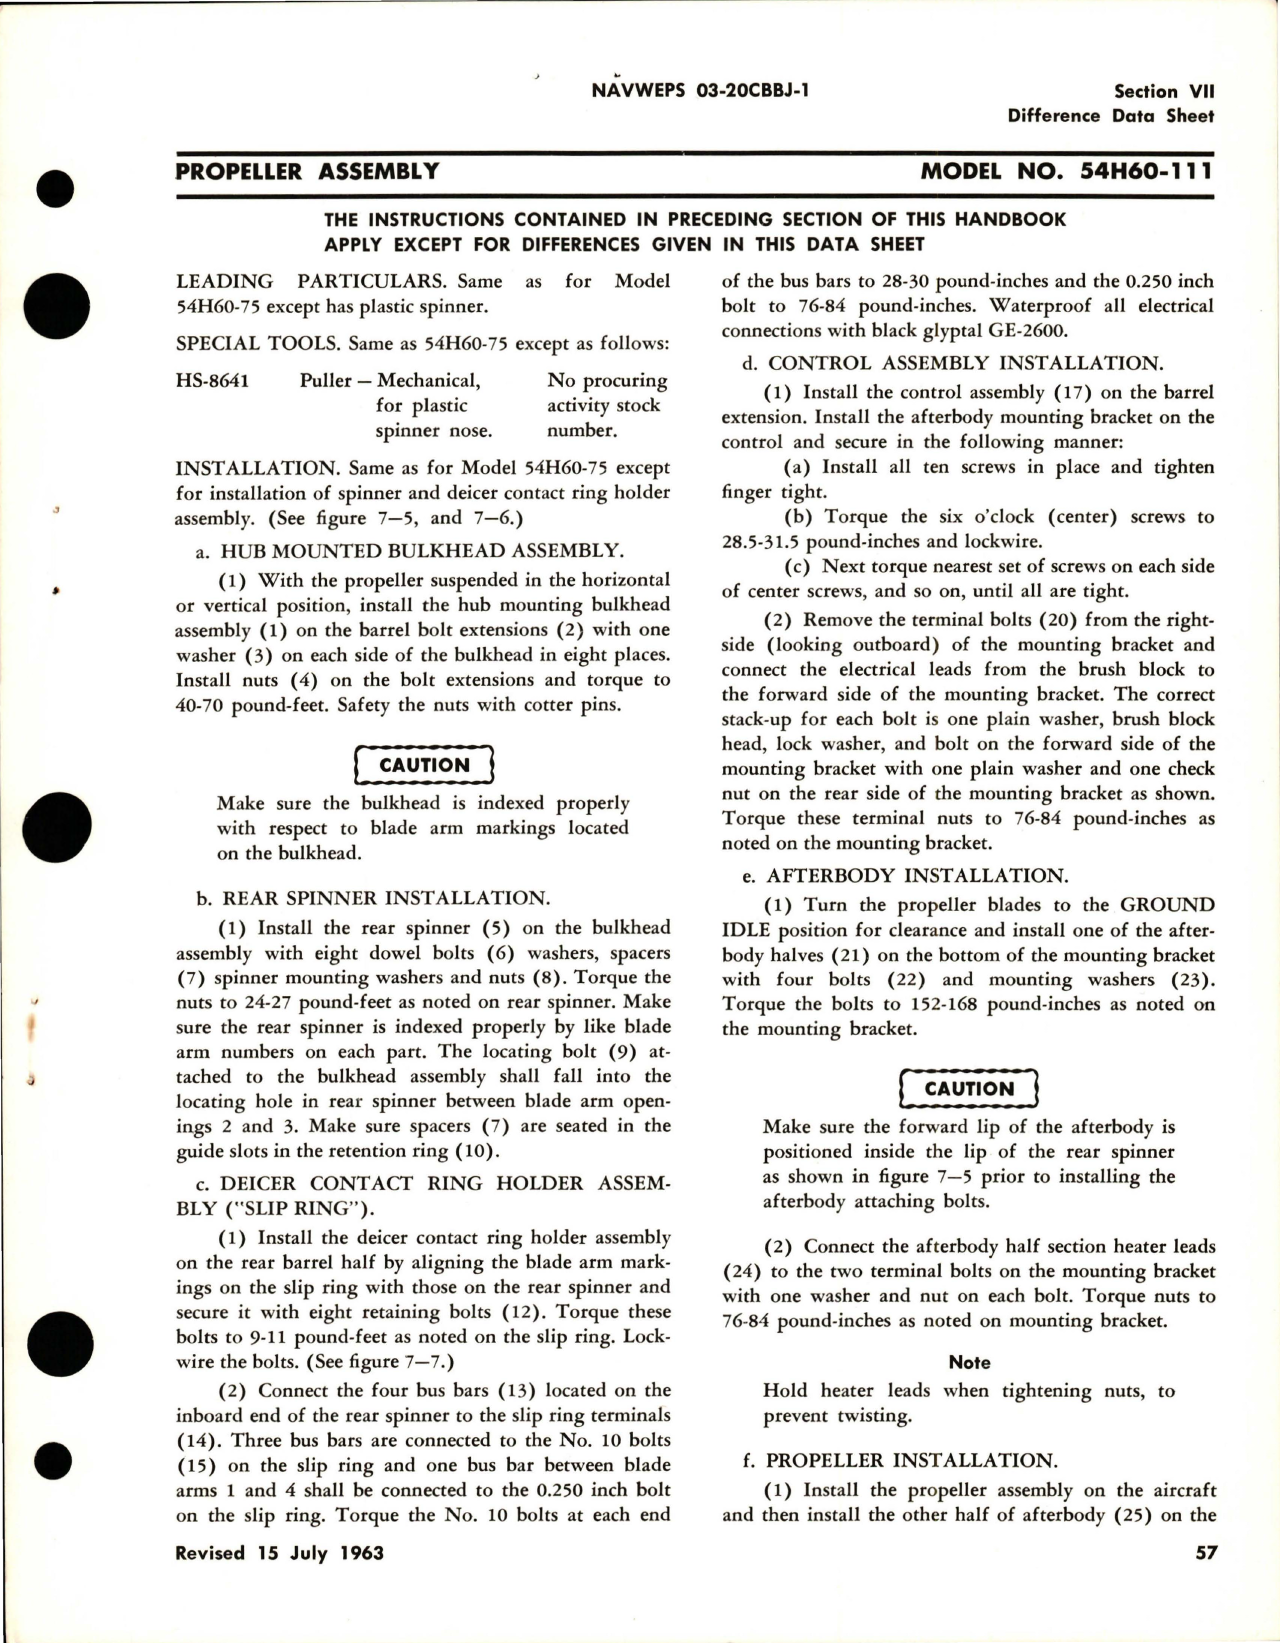 Sample page 5 from AirCorps Library document: Operation and Maintenance Instructions for Variable Pitch Propeller - Models 54H60-73, 54H60-75, 54H60-85, 54H60-89, and 54H60-111 